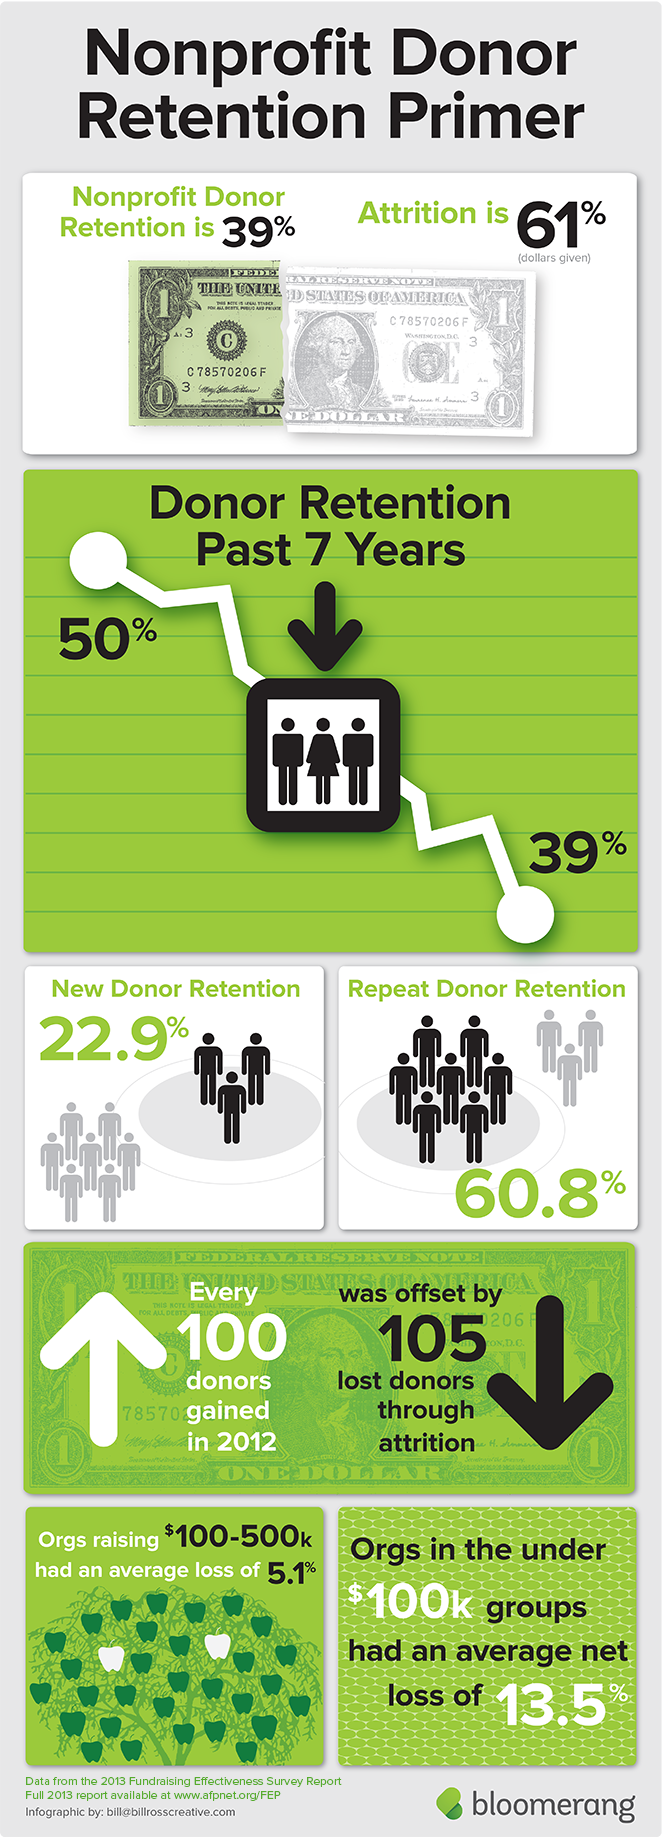 Bloomerang_Donor _Retention_Infographic